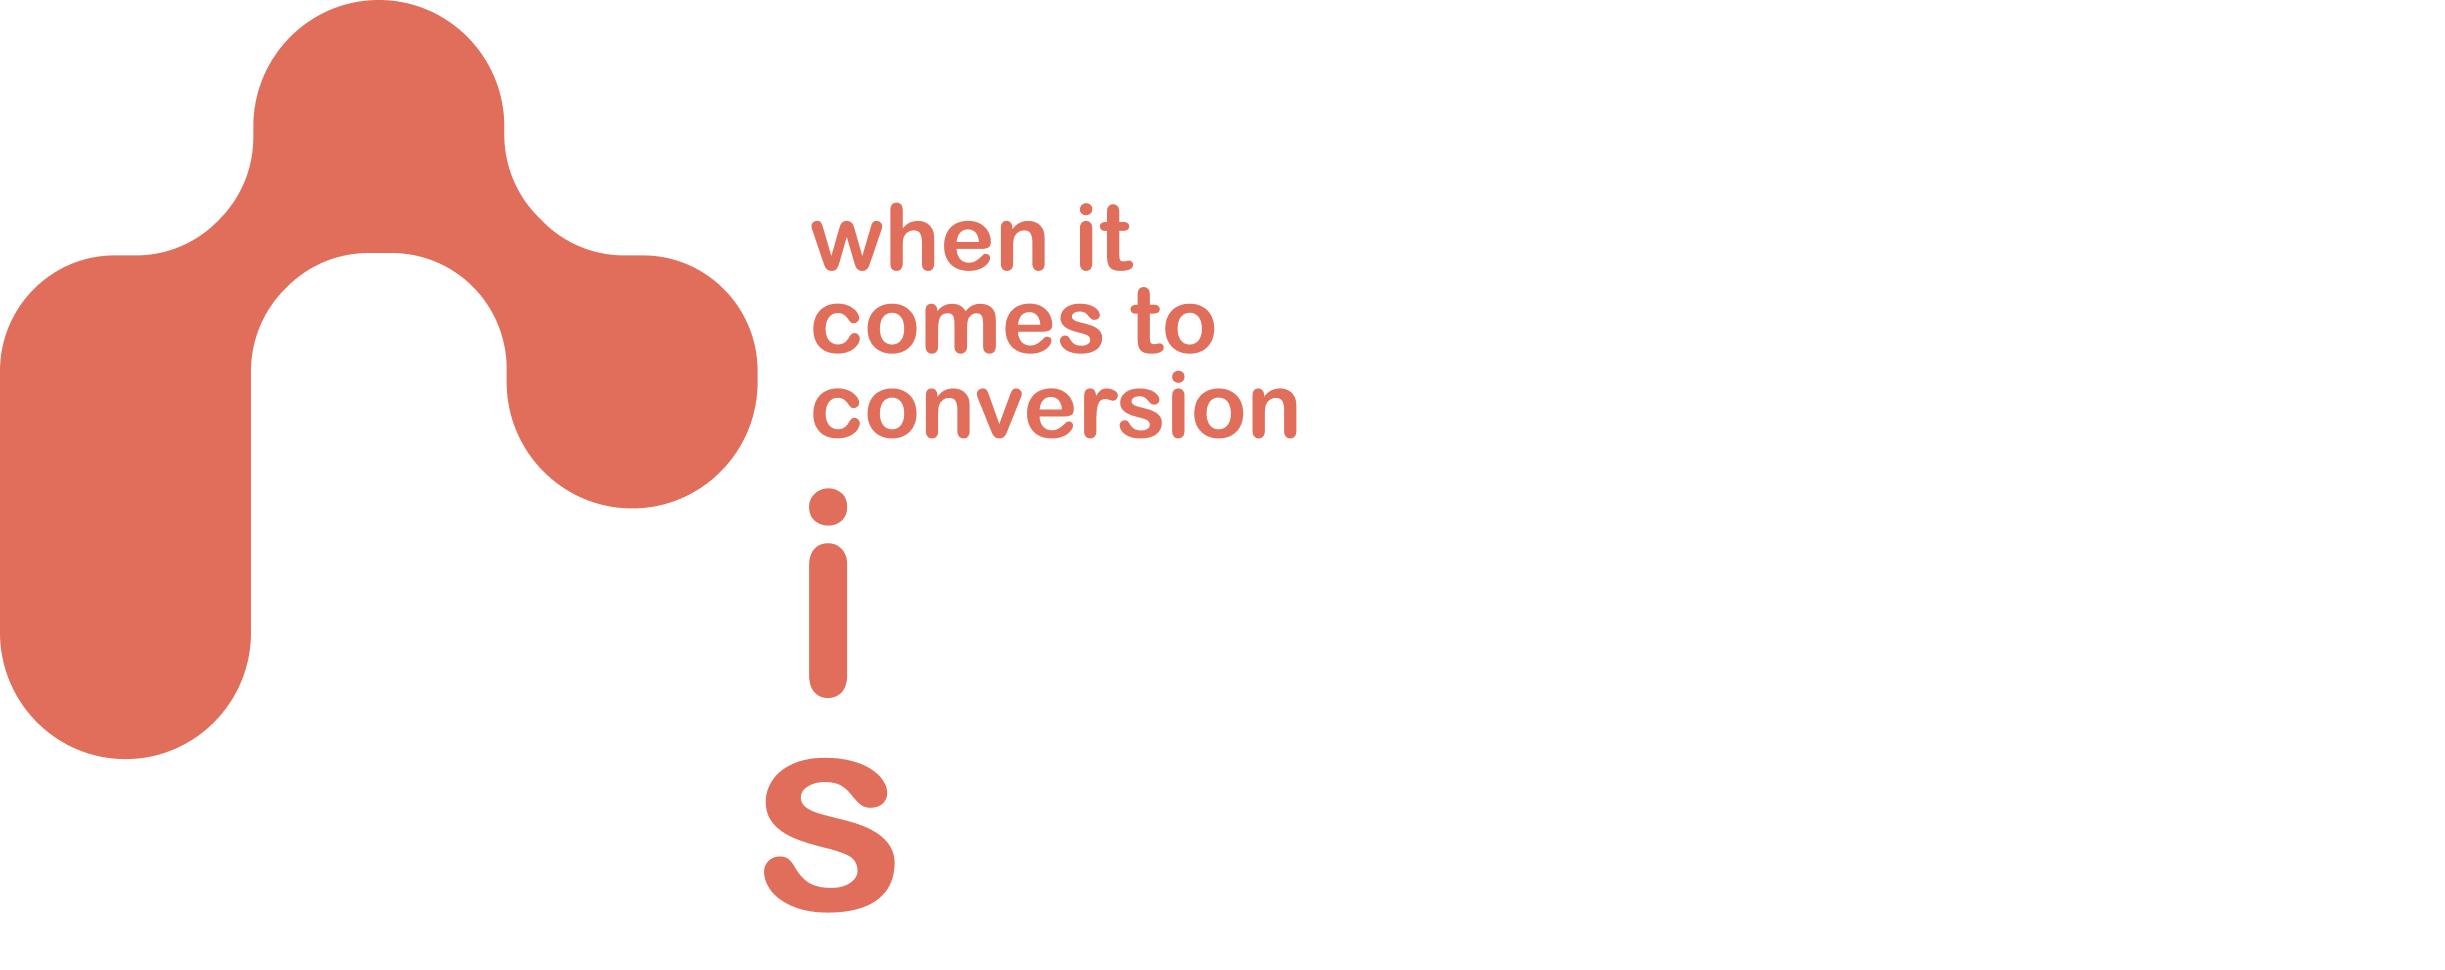 When it comes to conversion relationship is everything